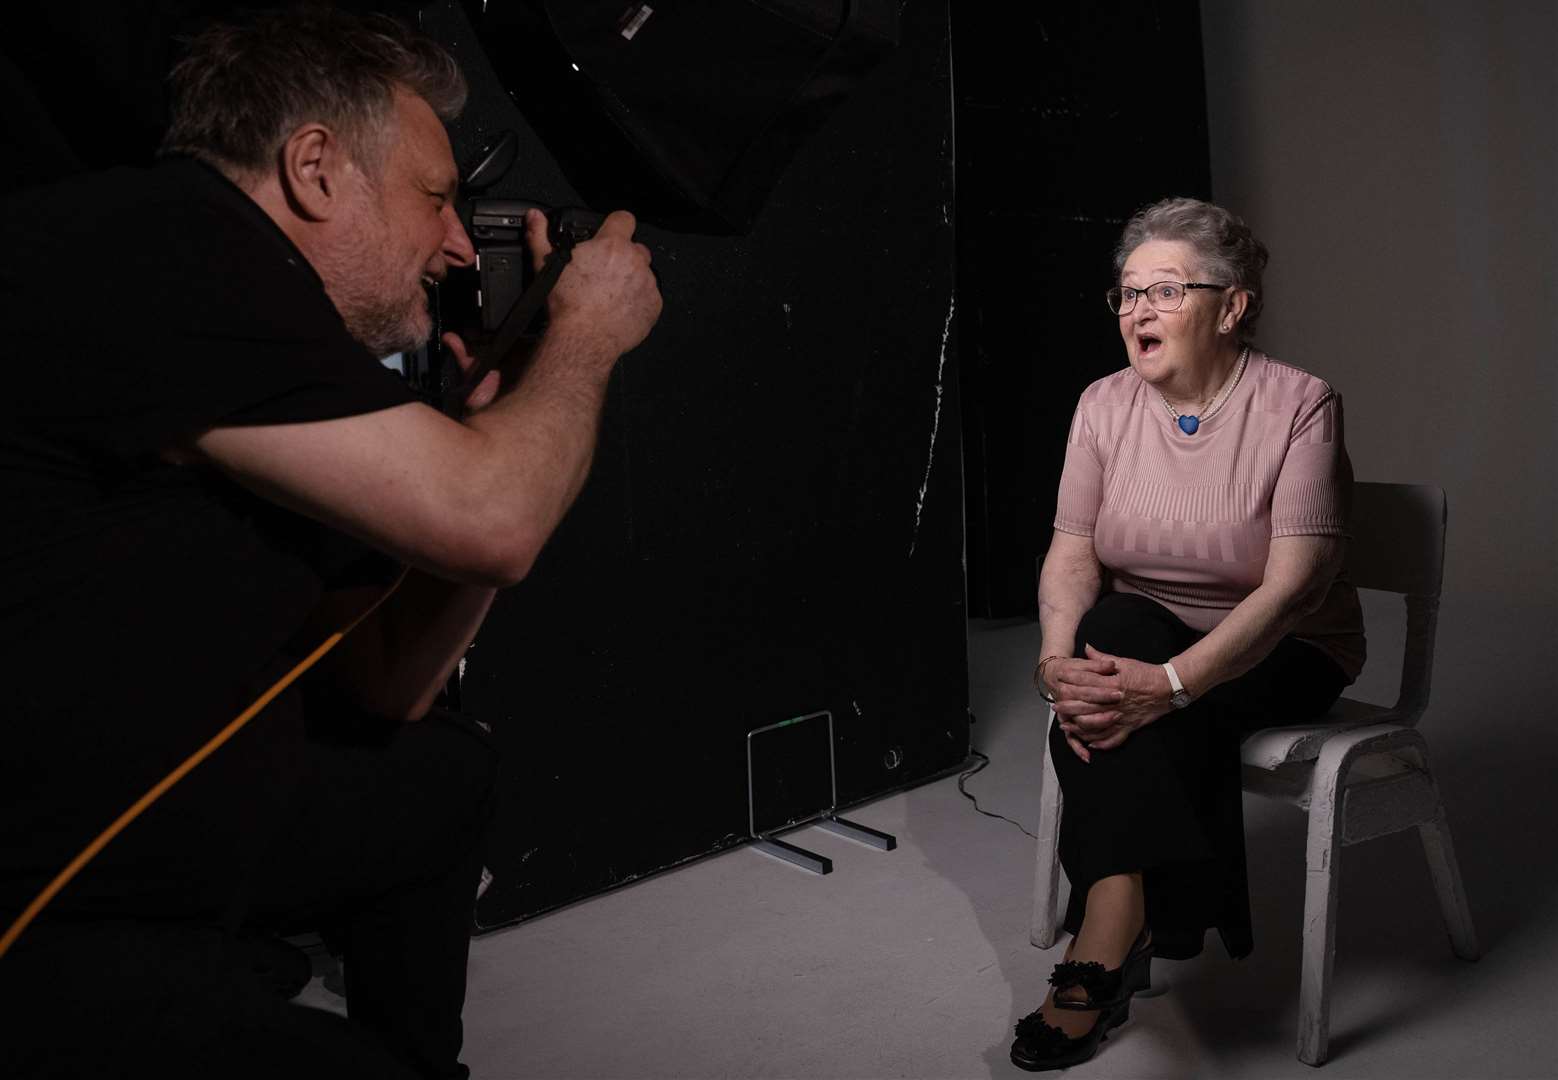 Beryl Fairclough, 76, from Barnsley, during a photoshoot with Rankin as part of a new exhibition led by NHS Charities Together (Matt Alexander/PA)